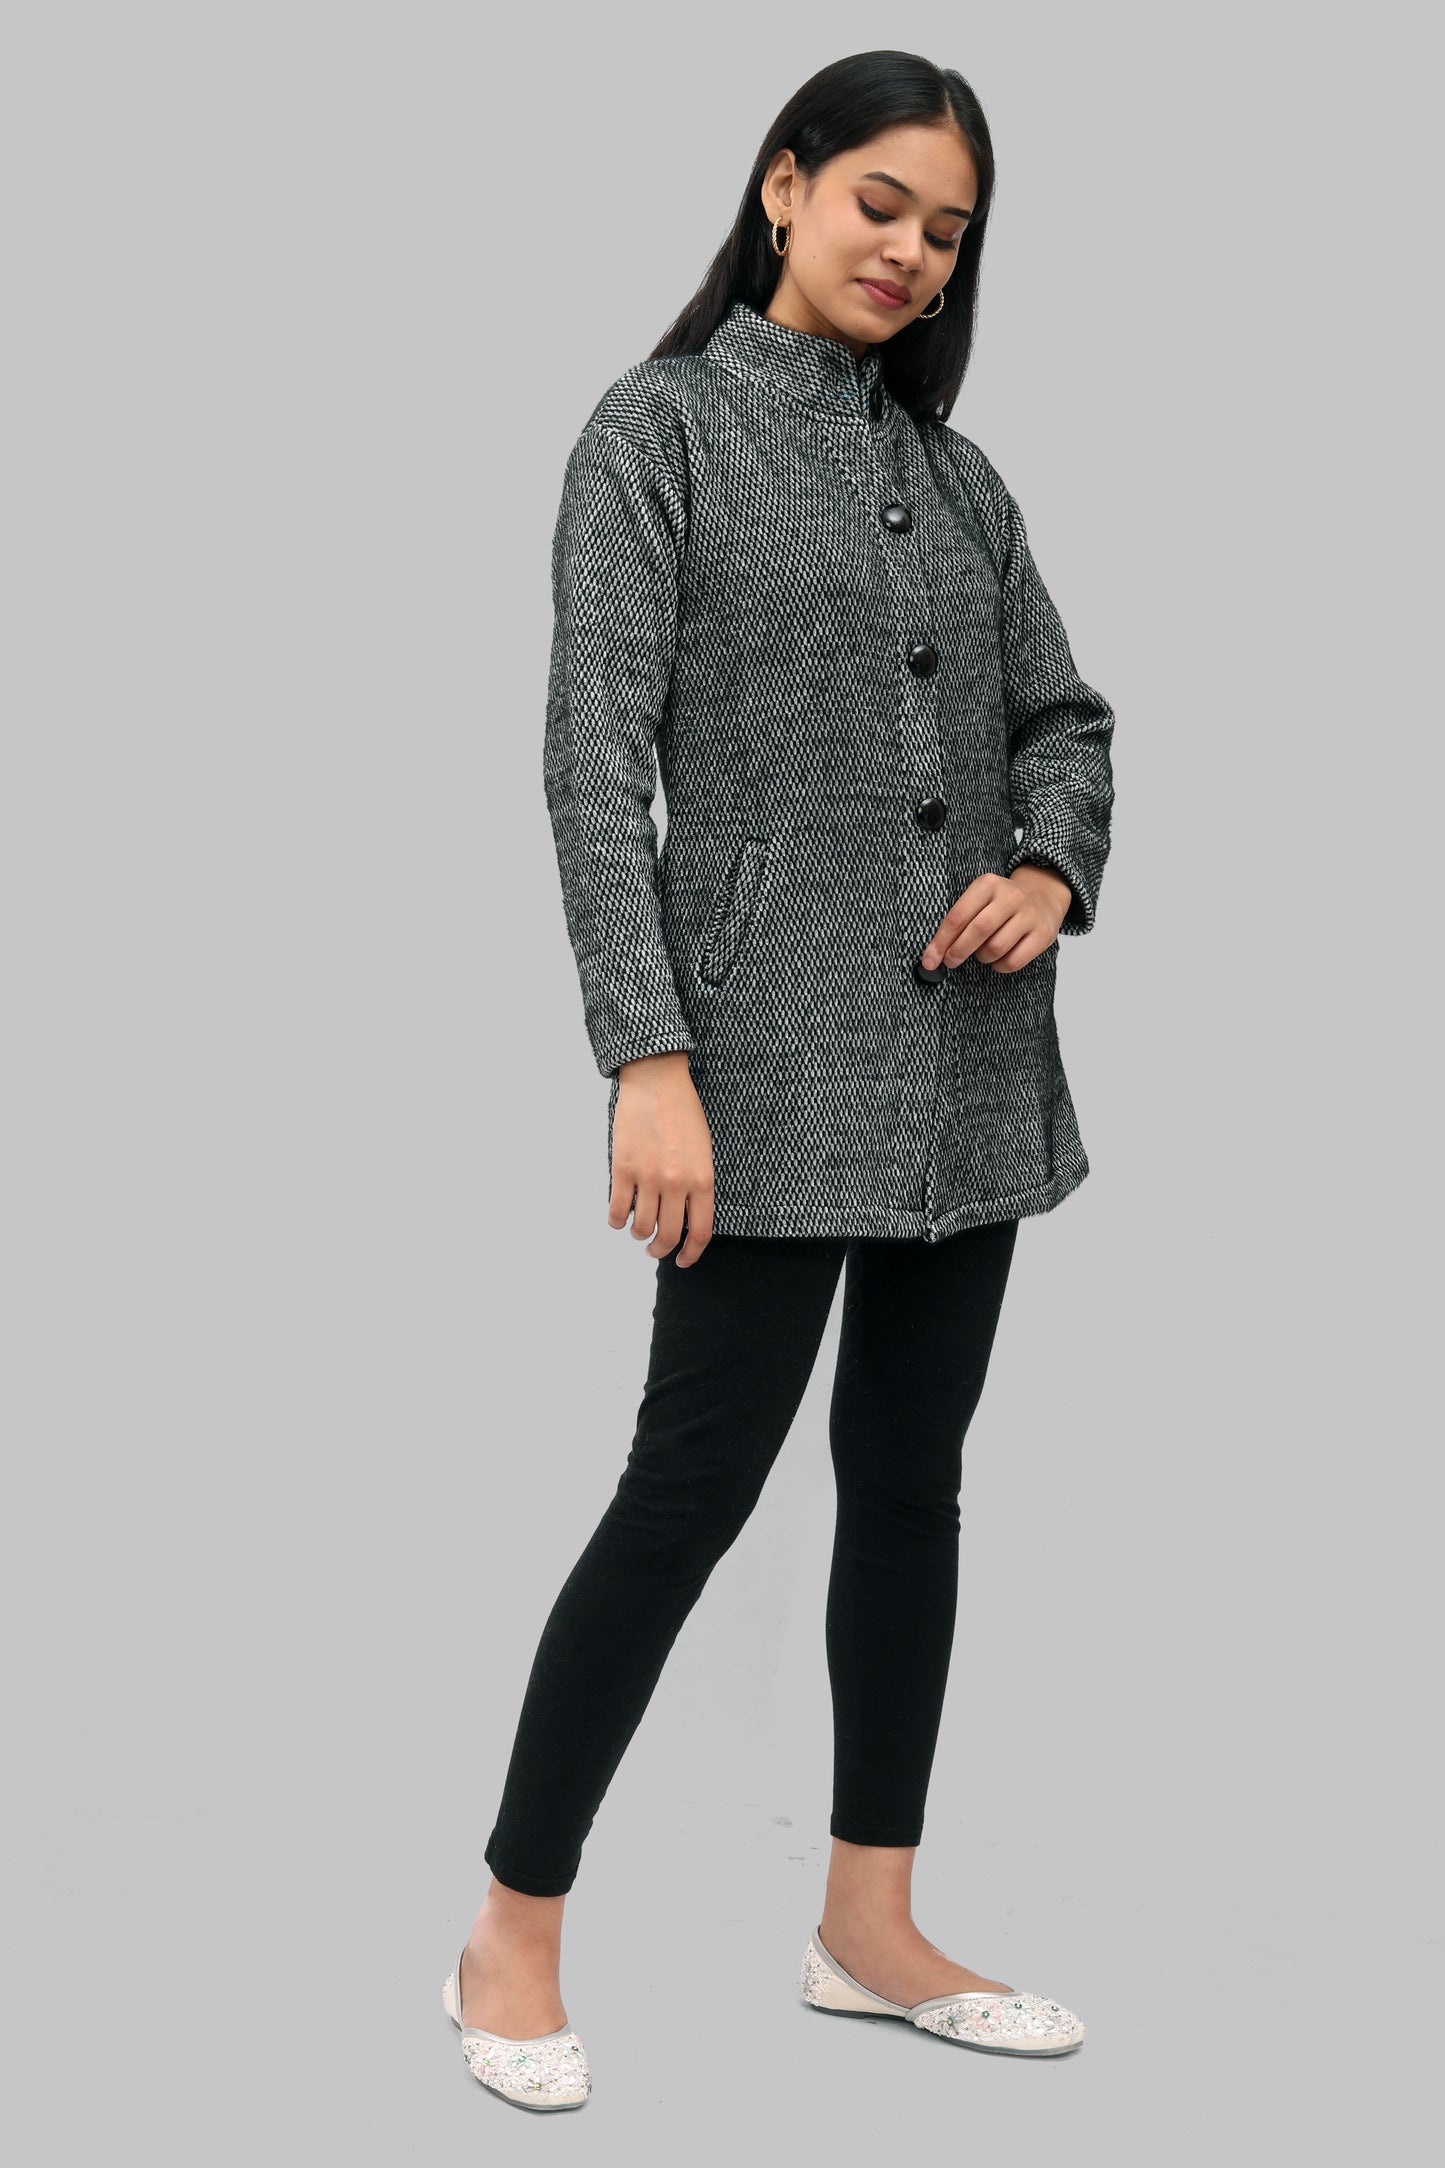 Ada Fashions Black and White Wool Coat With Side Pocket